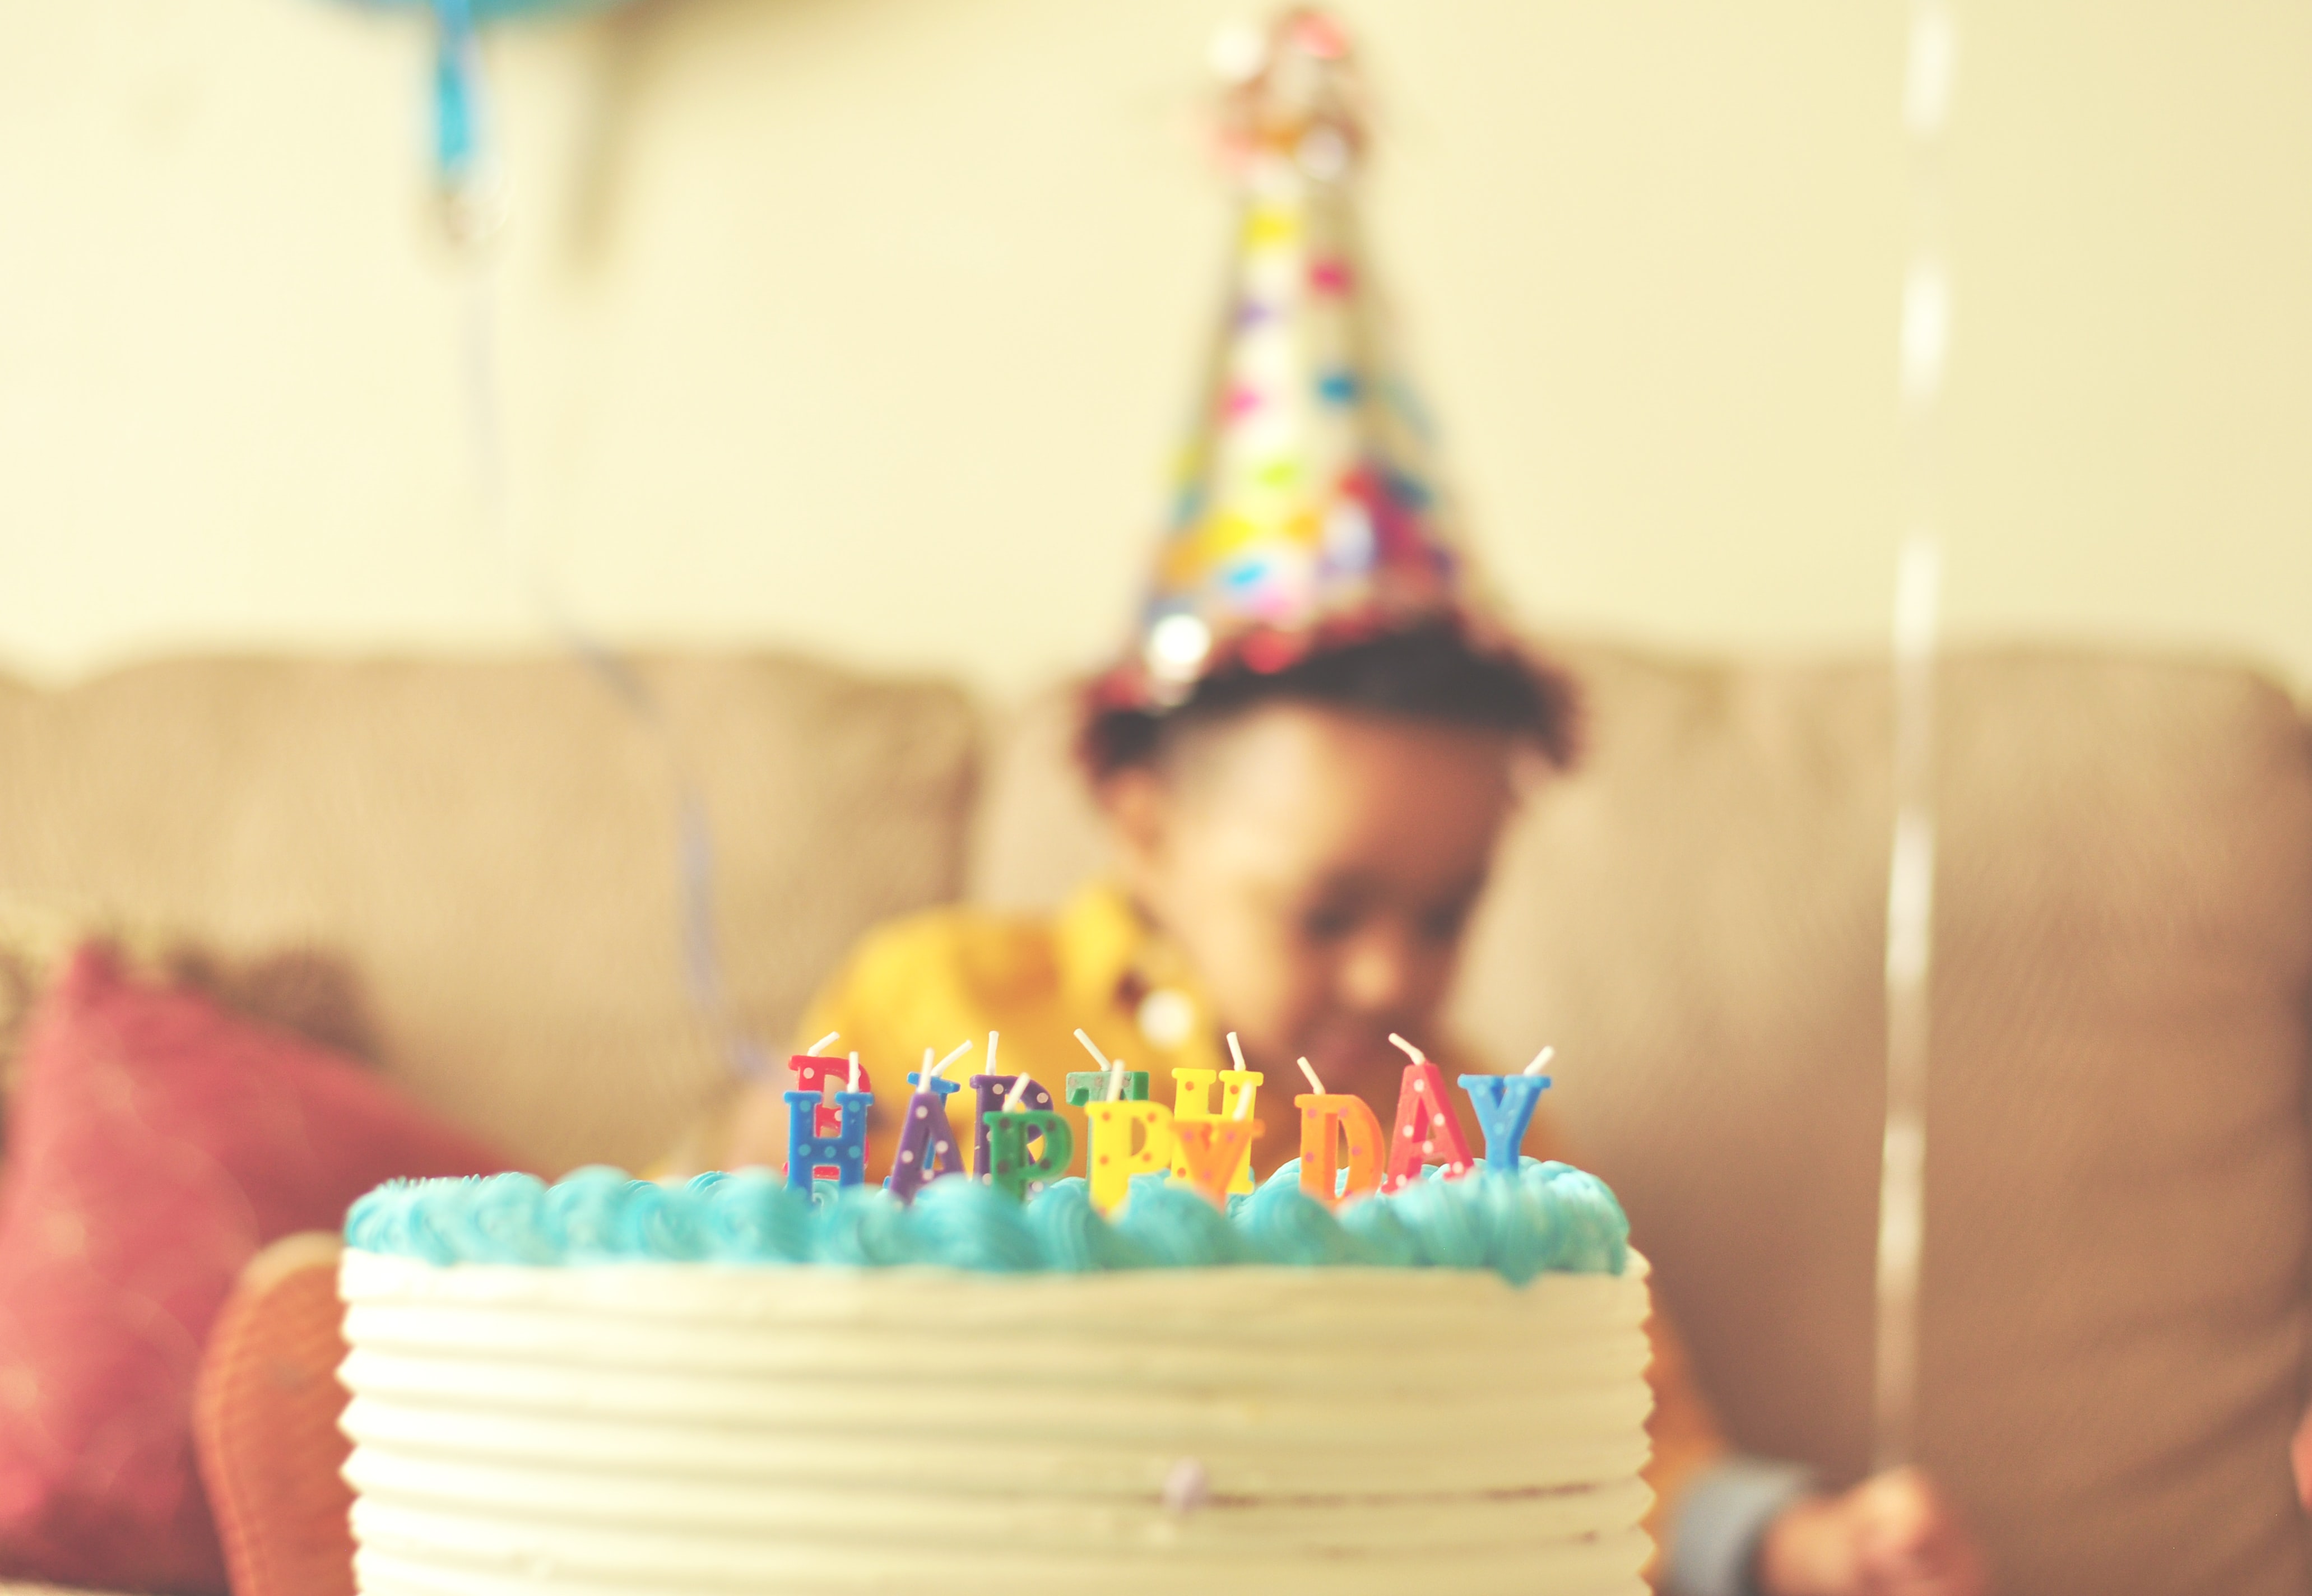 Turning 1 & Having Fun! 13 Secrets to a Successful First Birthday Party